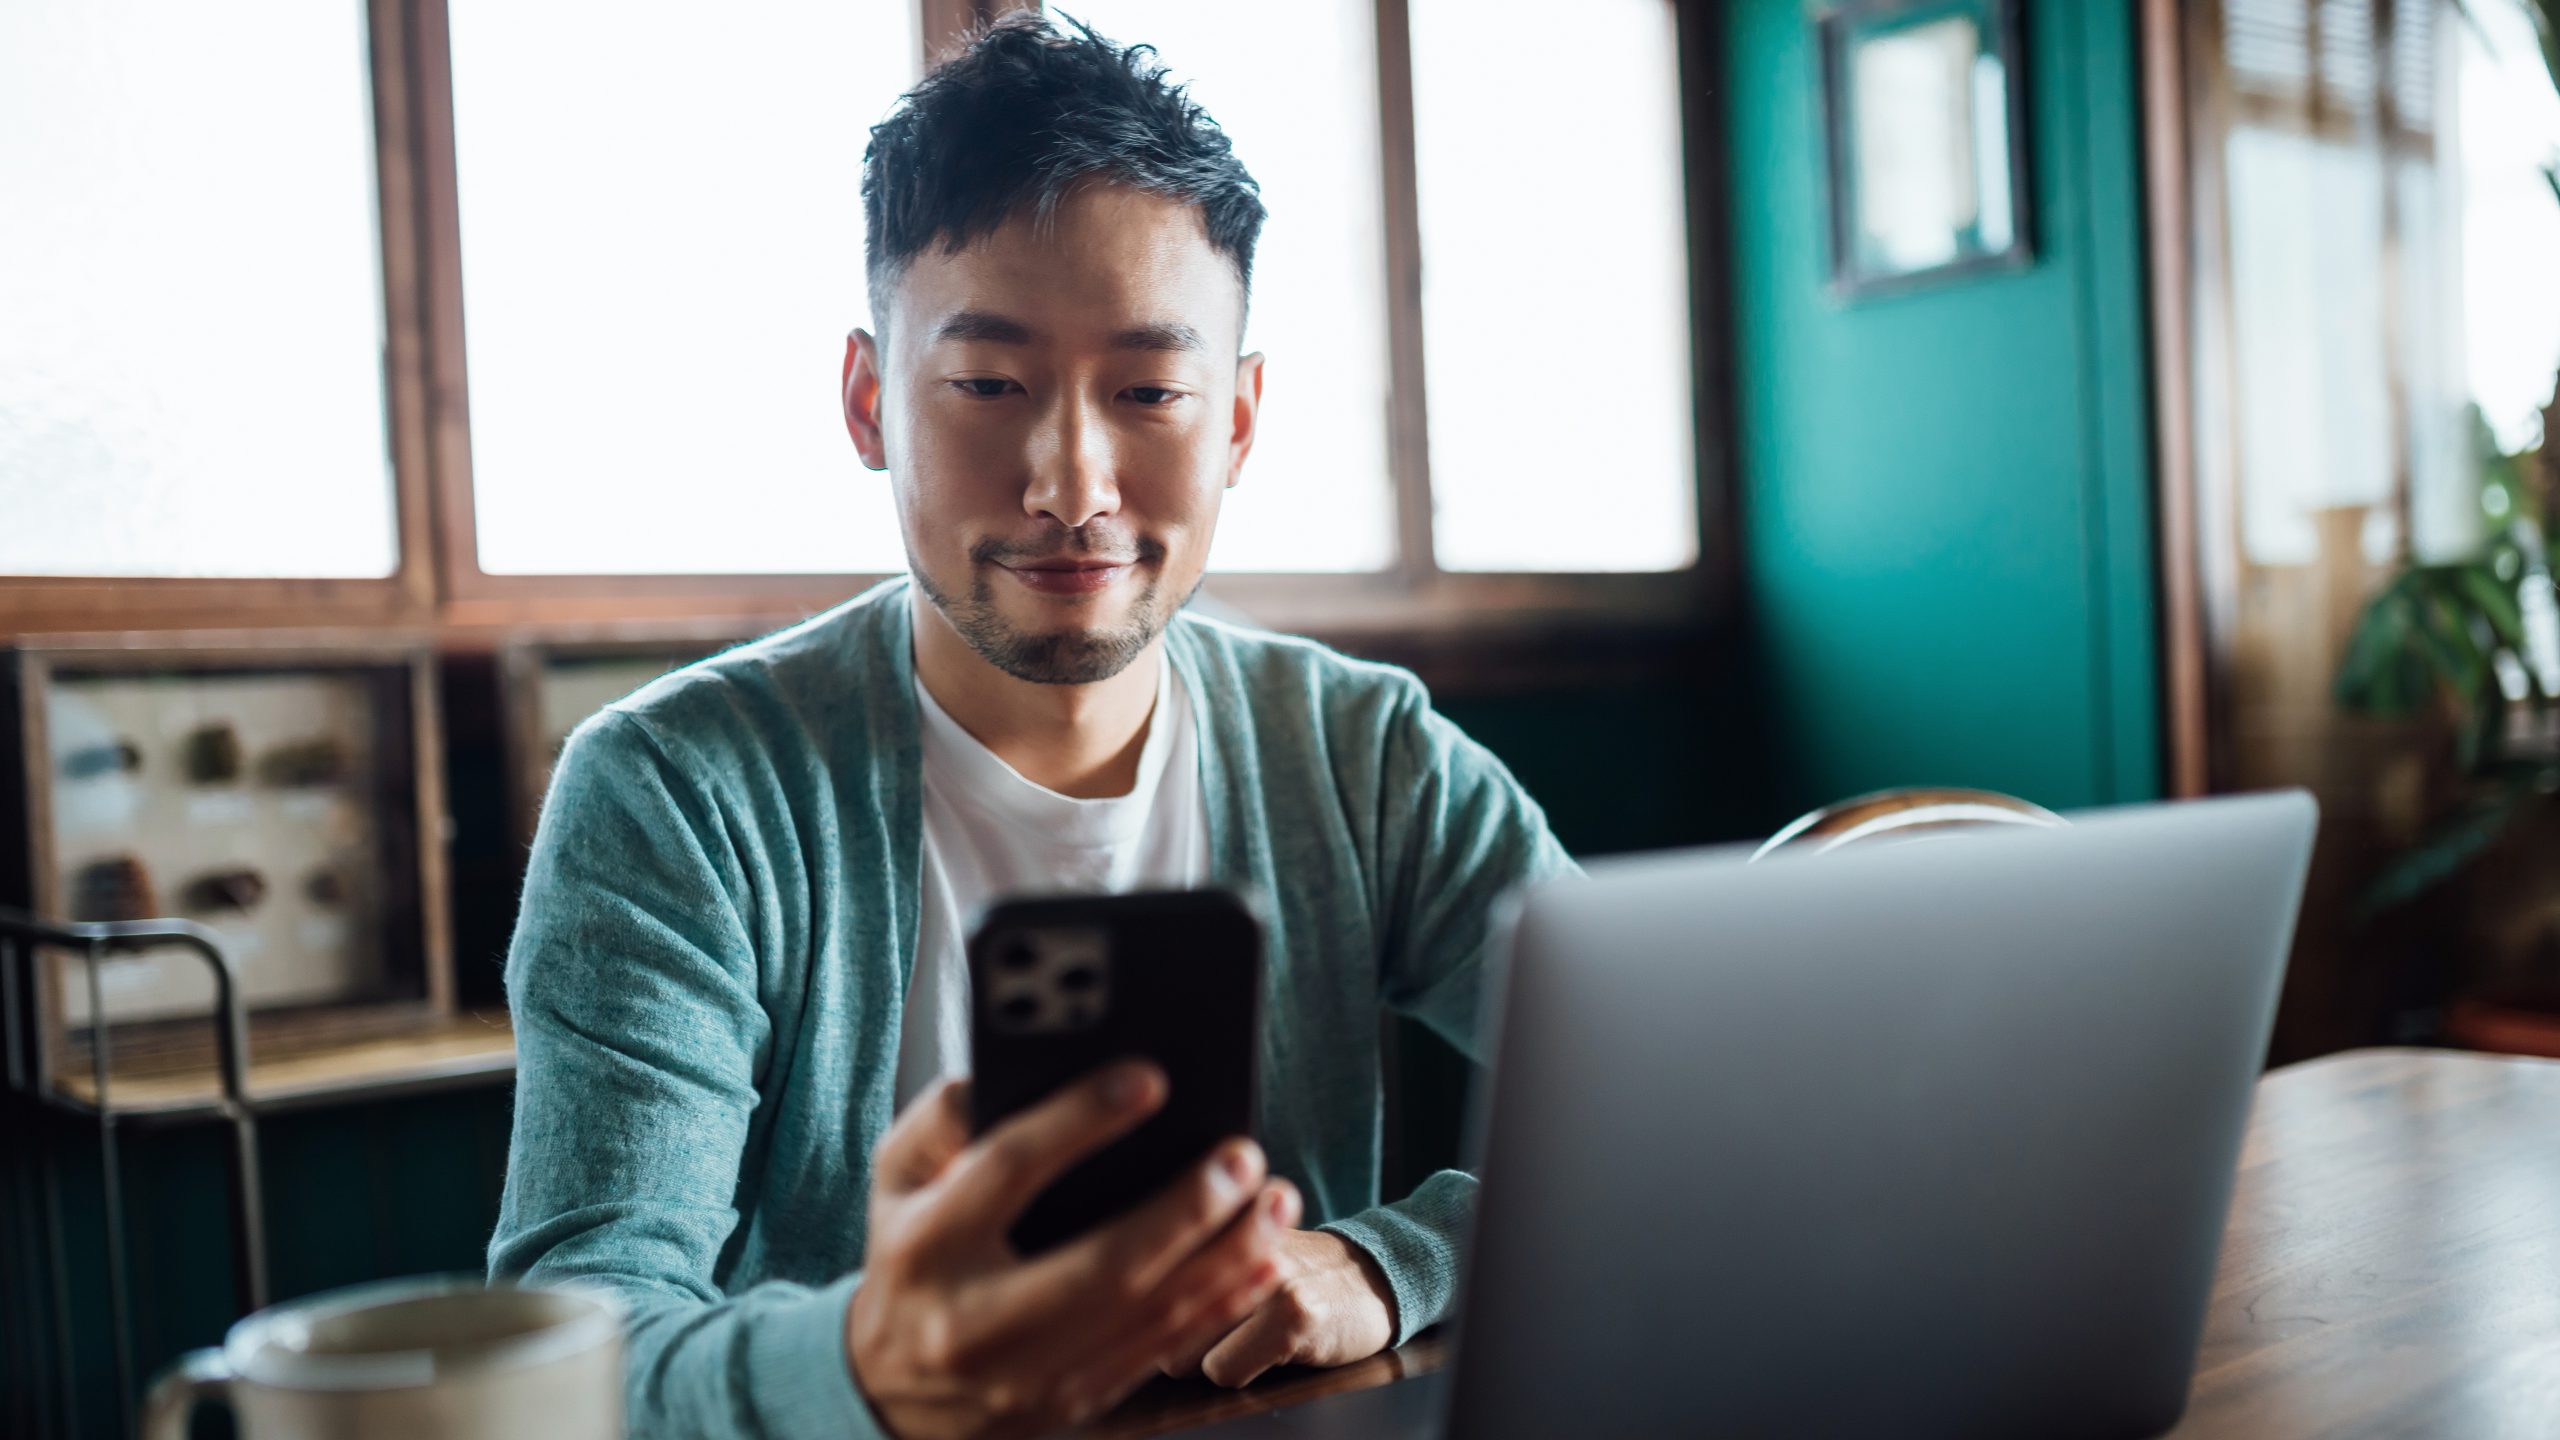 Confident young Asian man looking at smartphone while working on laptop computer in home office. Remote working, freelancer, small business concept